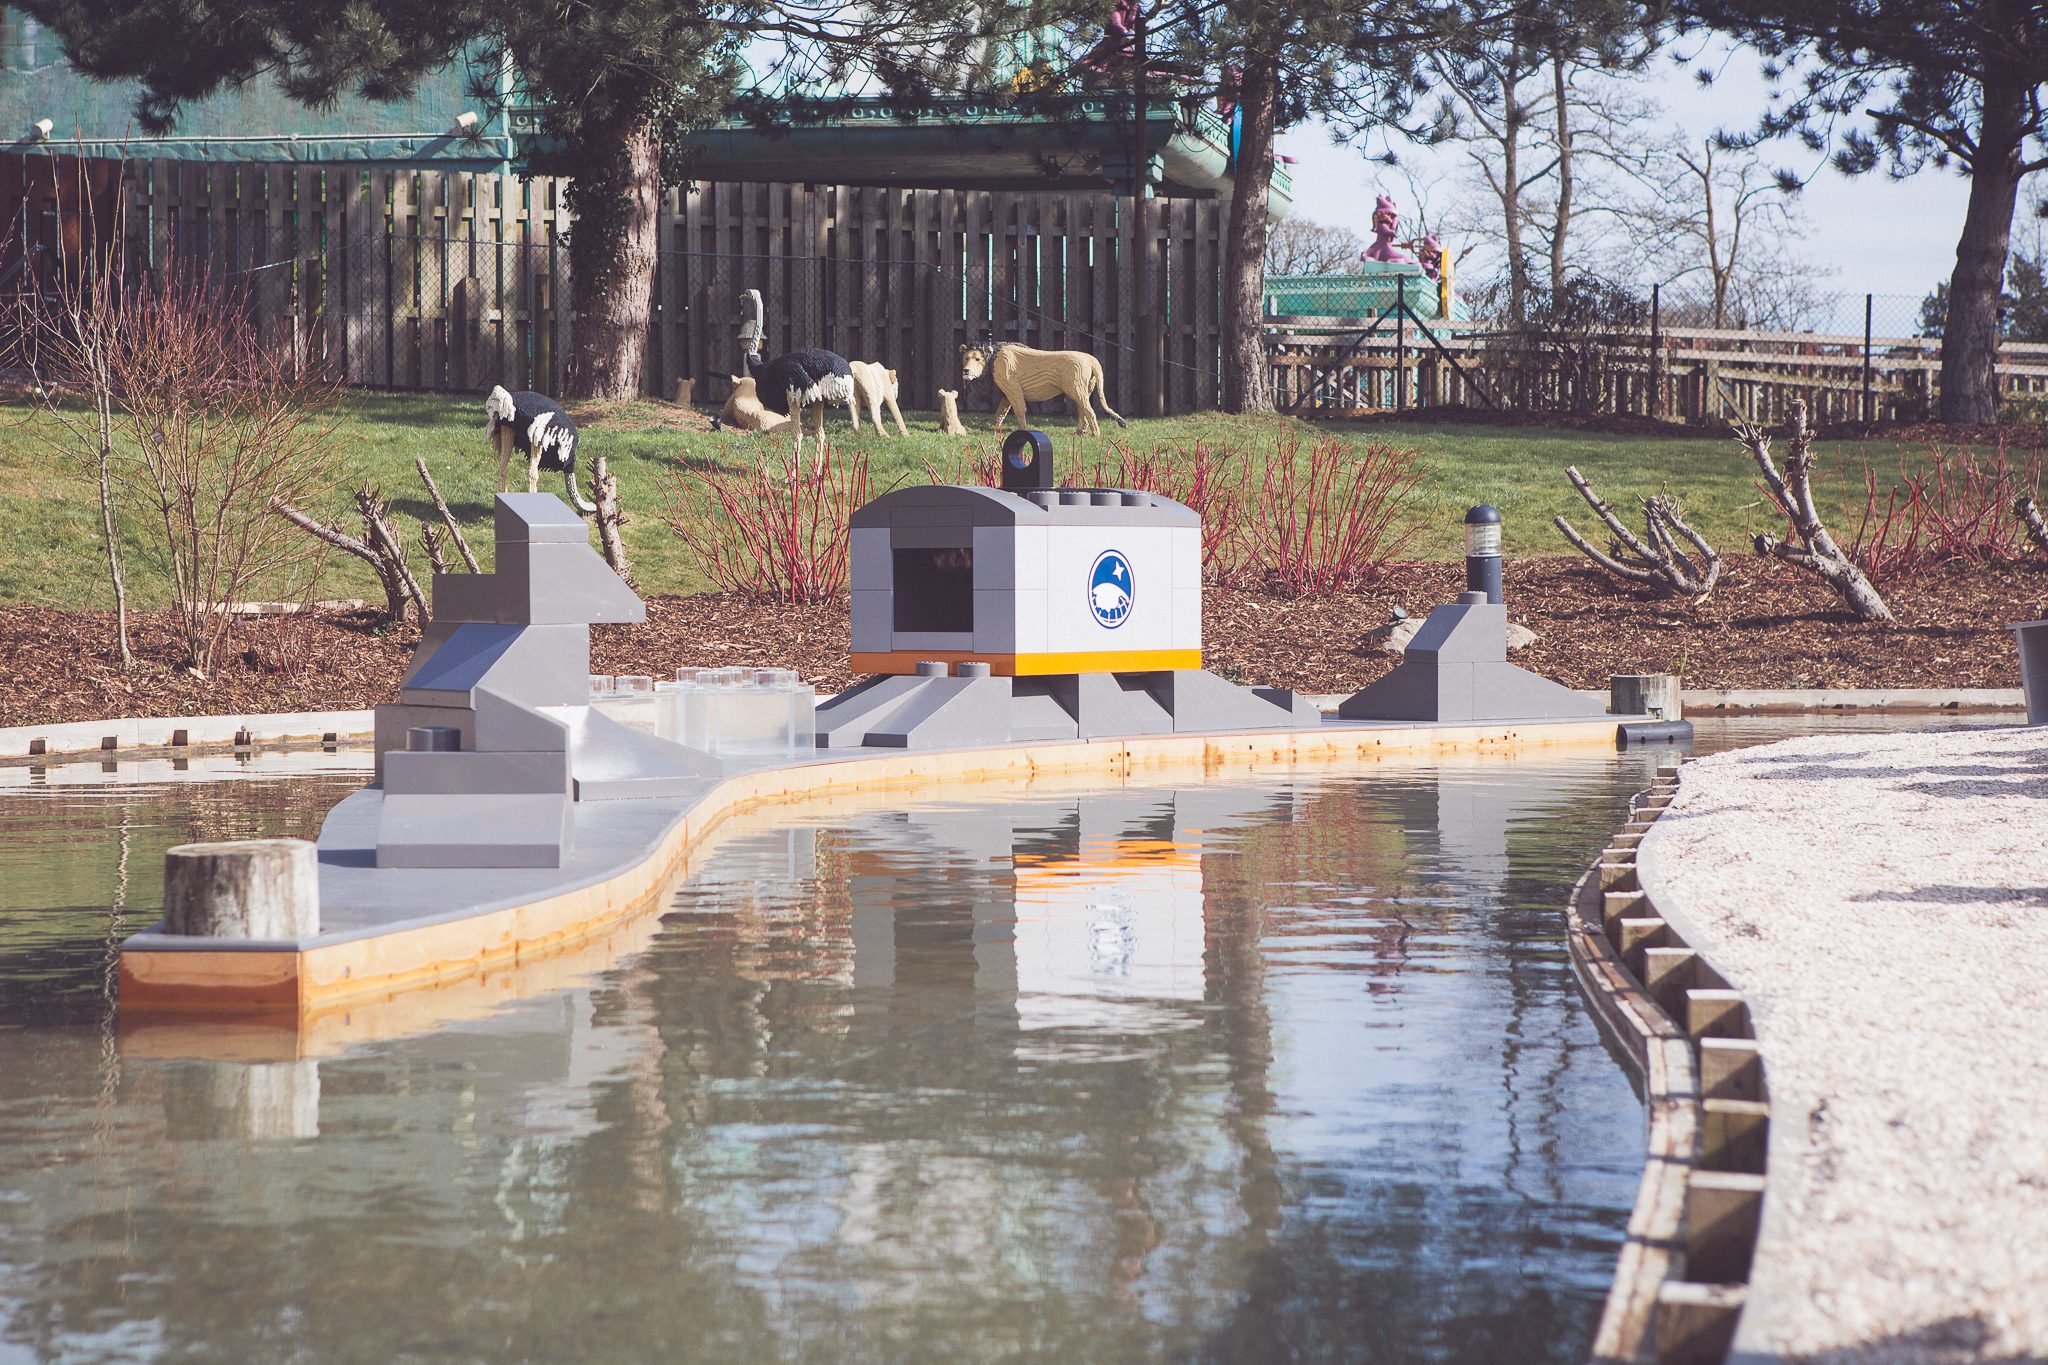 A water LEGO themed ride area close-up